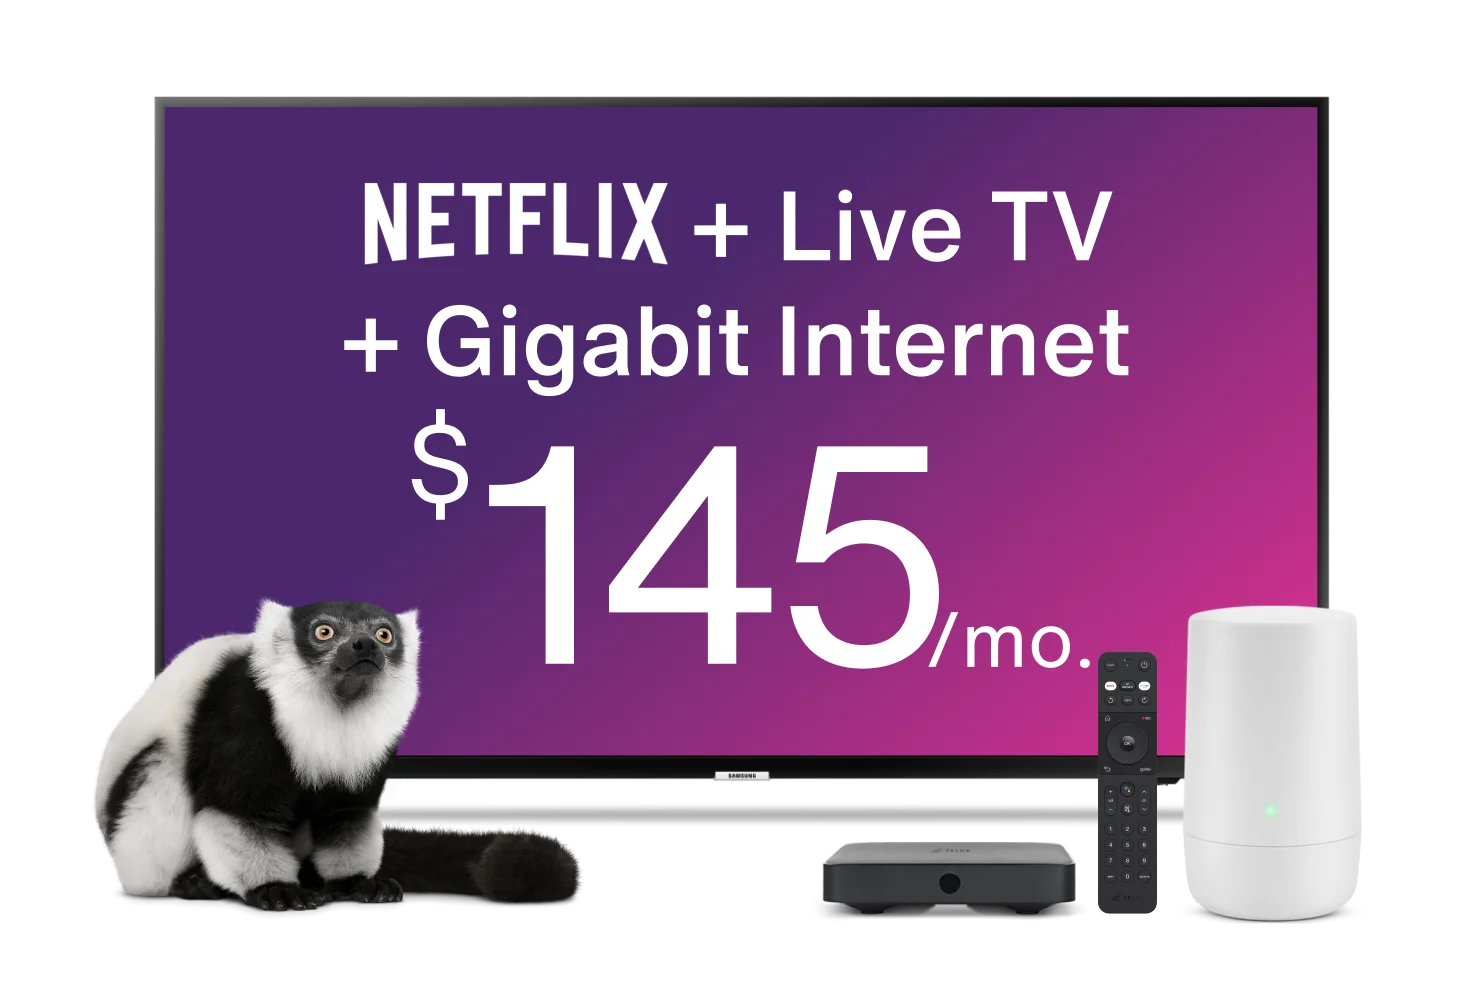 An image showing a TV with a lemur, TV box, Internet device and control on the foreground. The TV has a text that reads "Netflix plus Live TV plus Gigabit Internet for $145 per month".